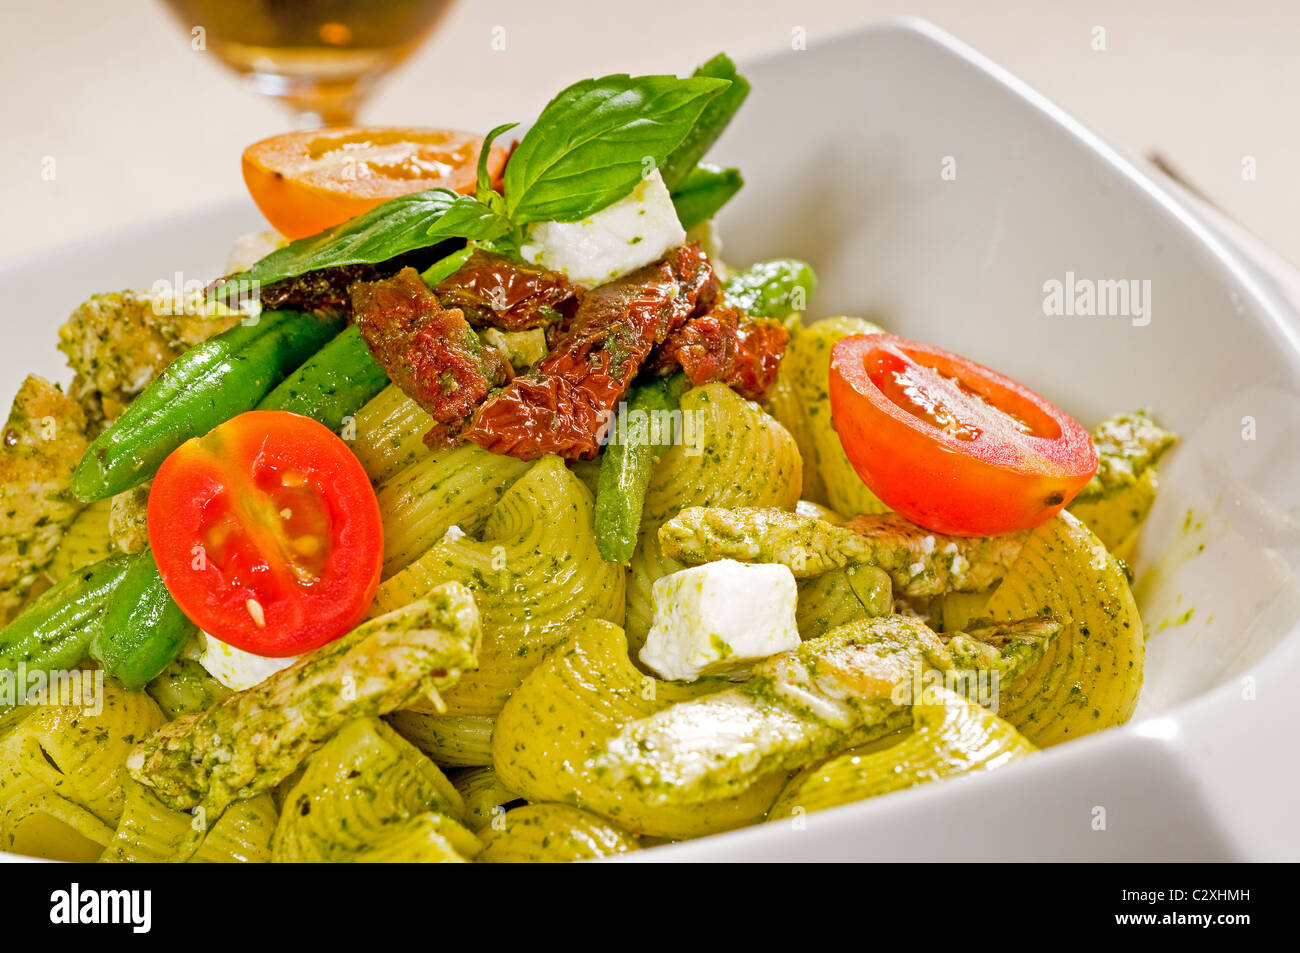 fresh lumaconi pasta and pesto sauce with vegetables and sundried tomatoes,tipycal italian food Stock Photo